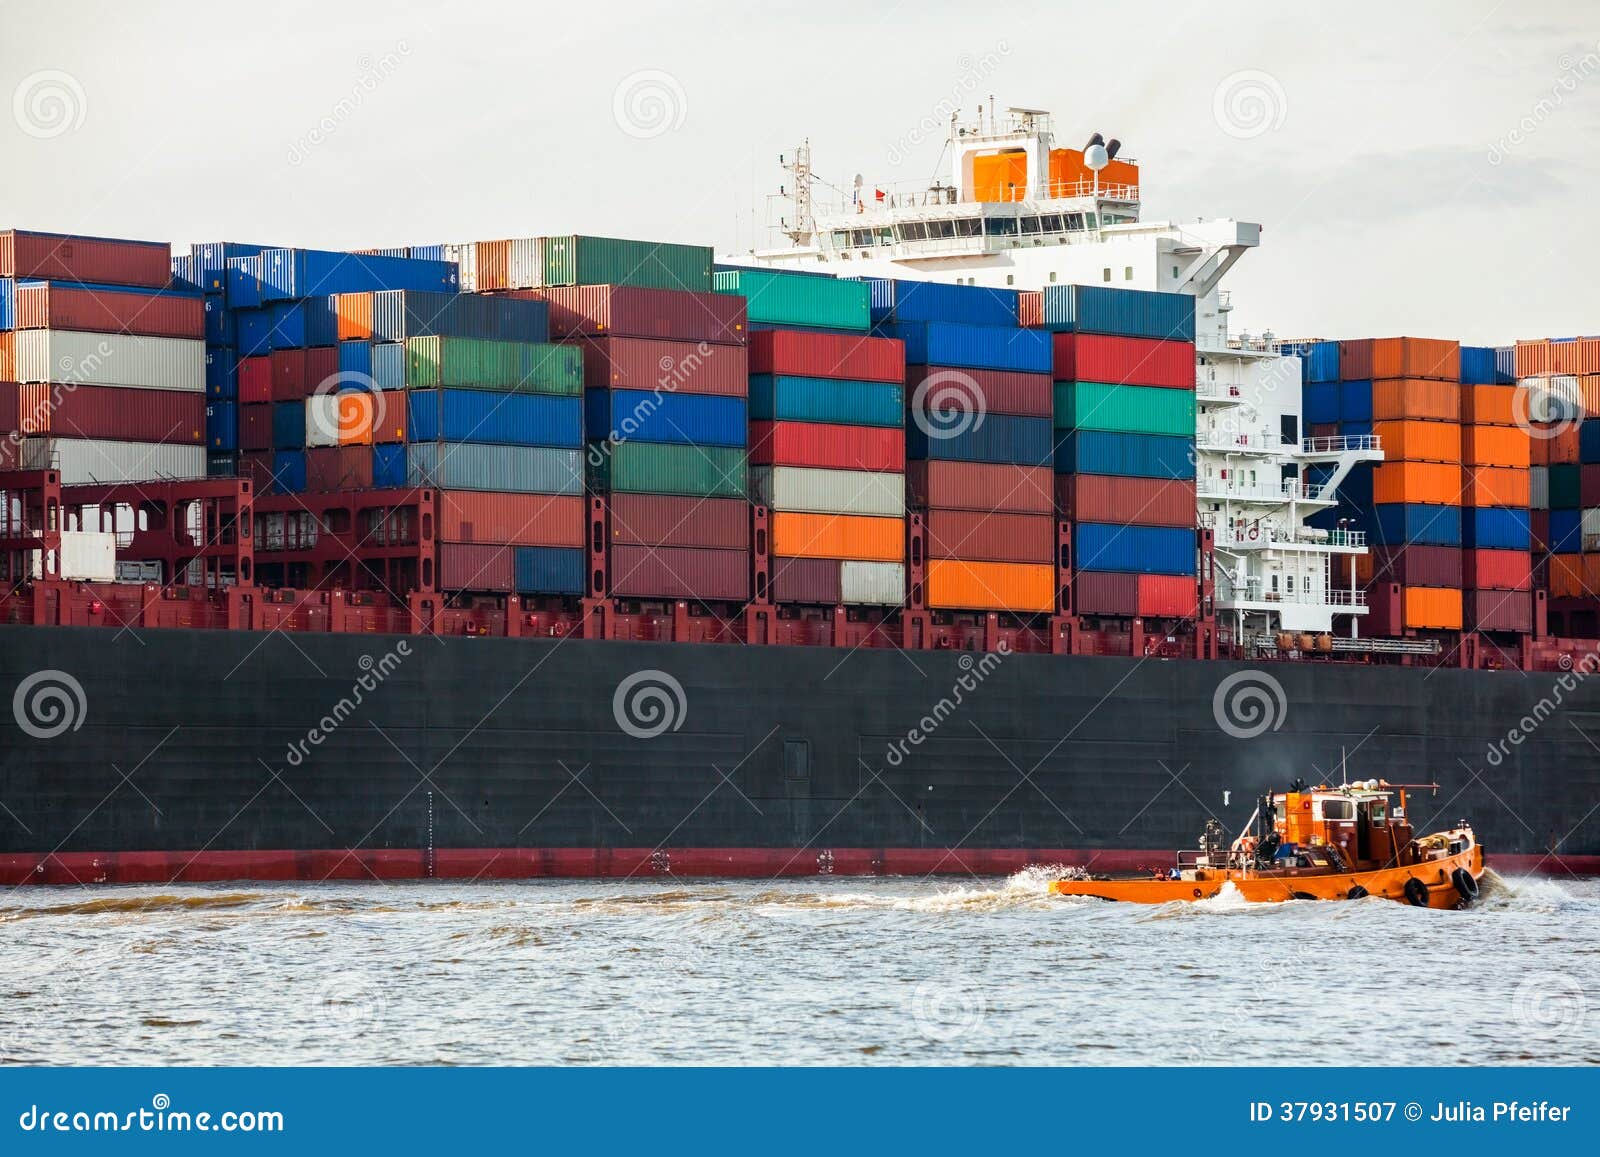 fully laden container ship in port